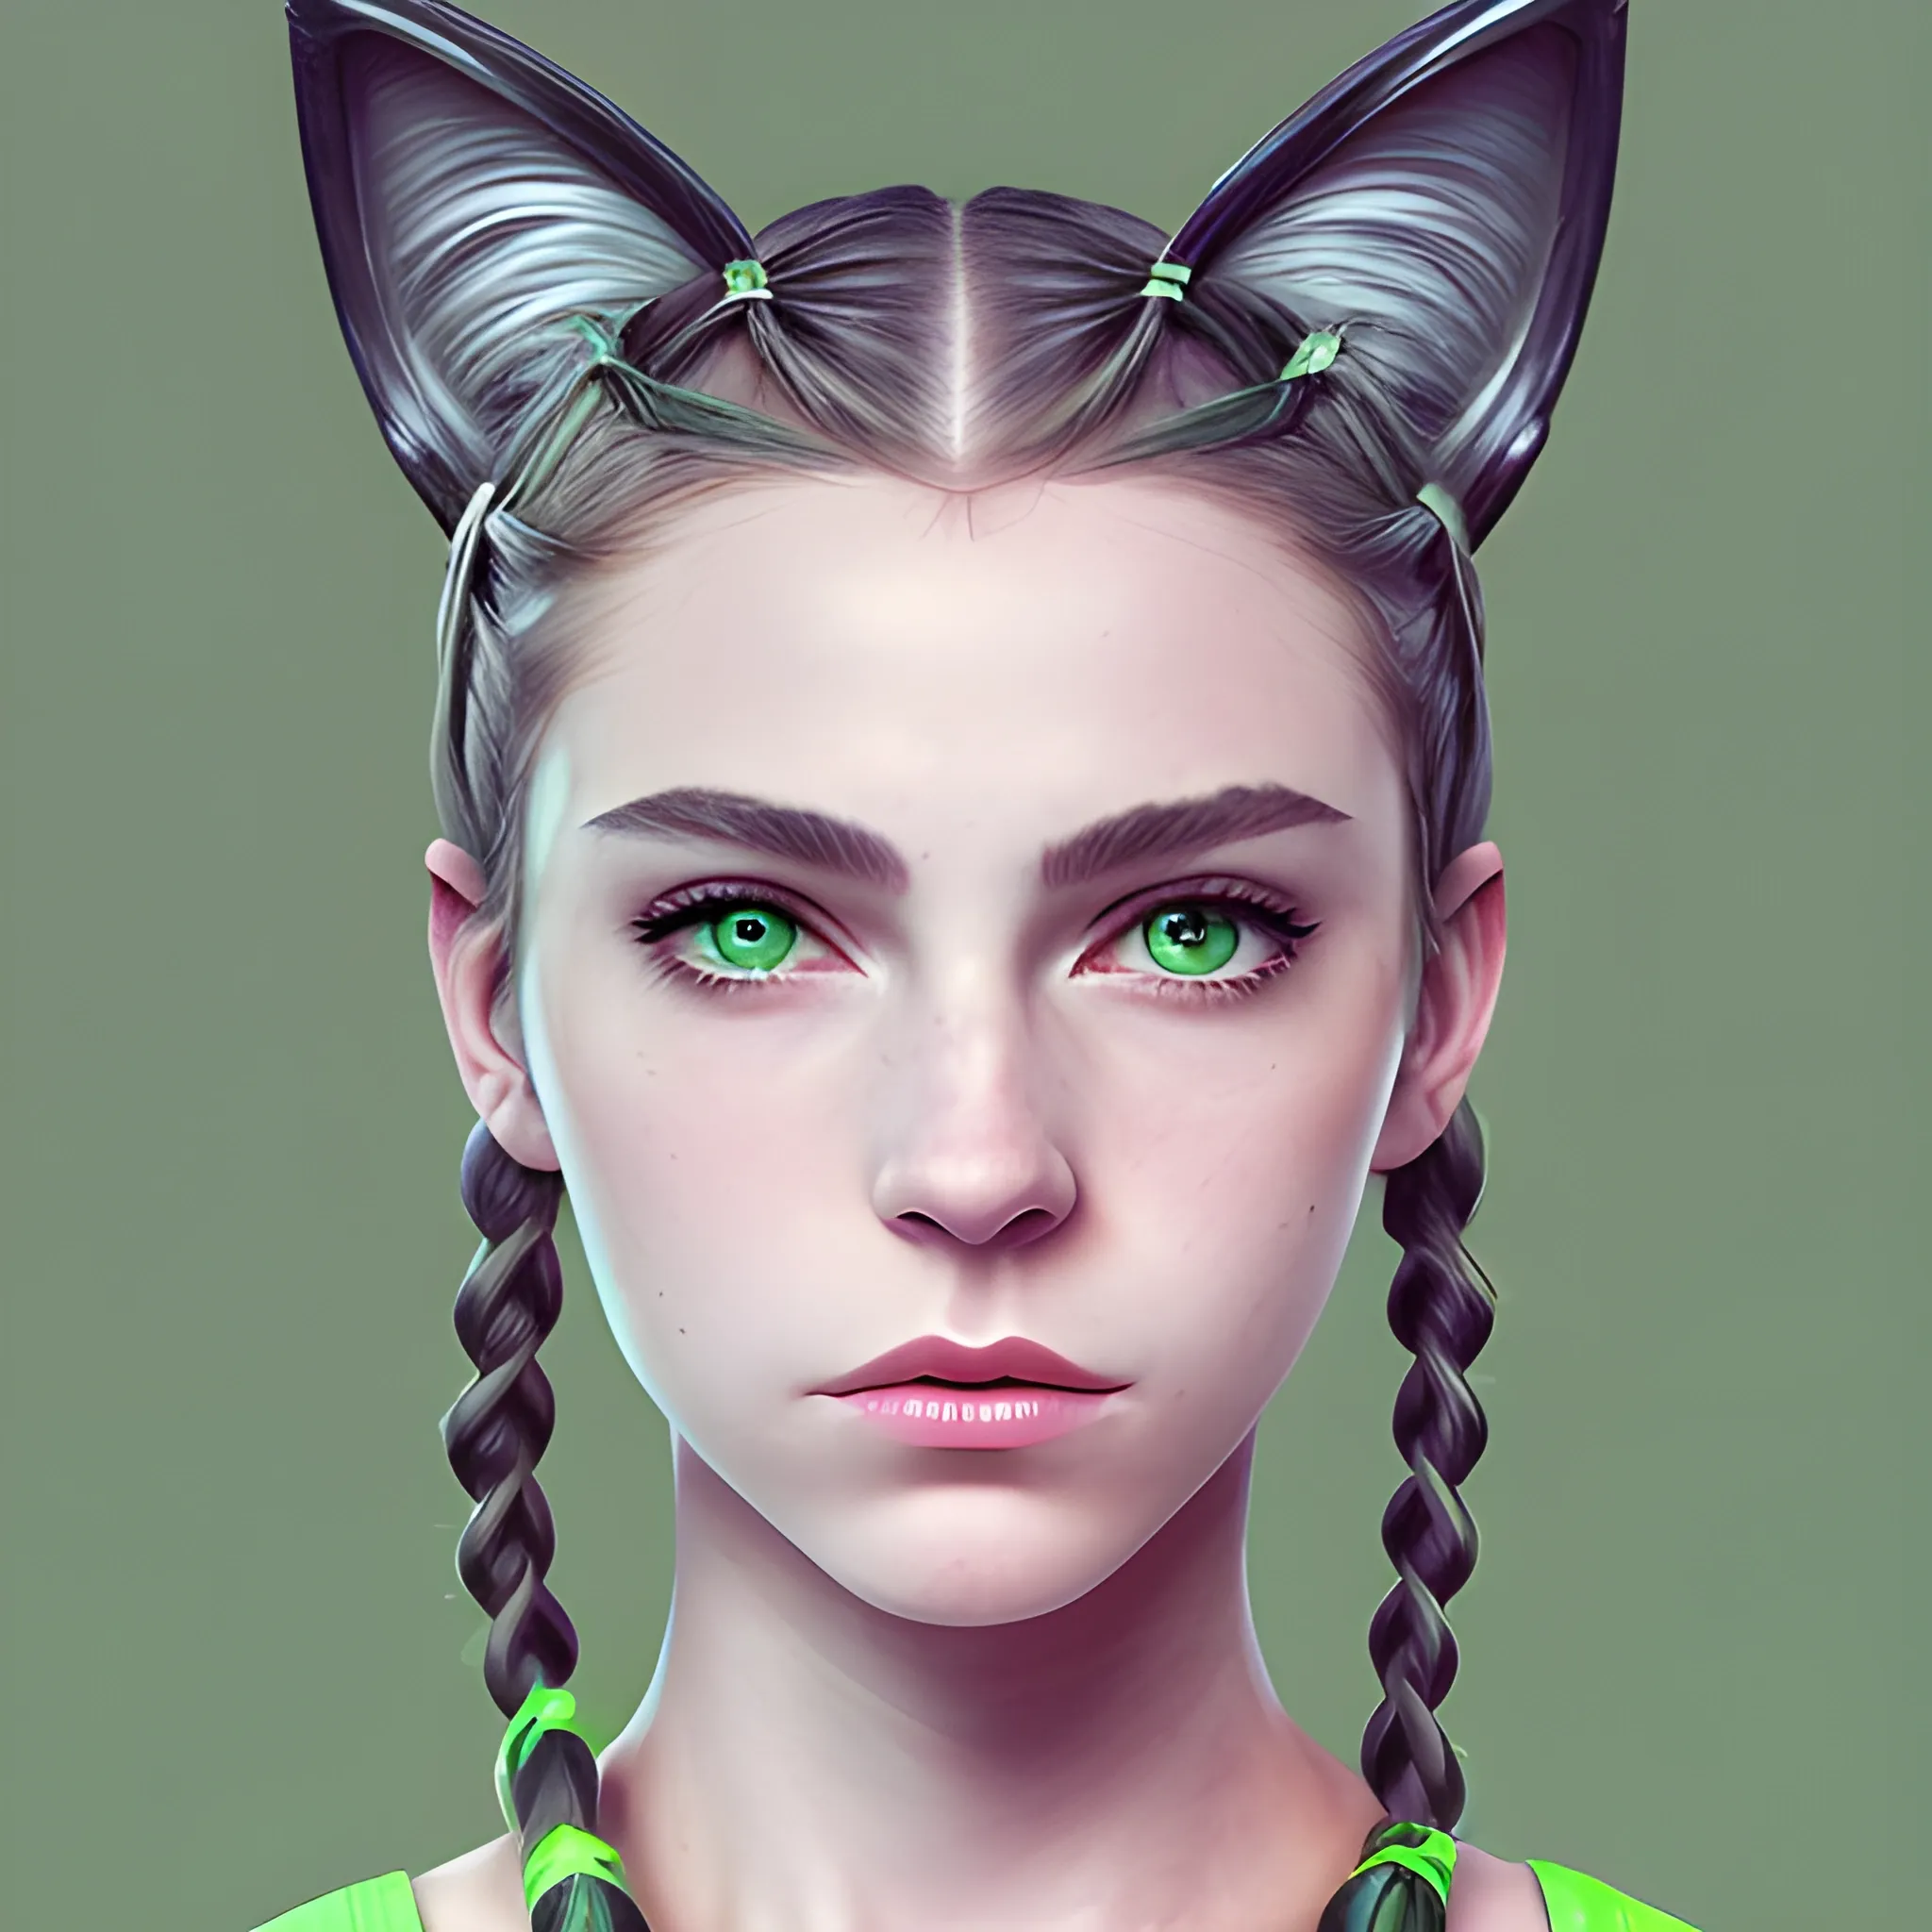 Sci-Fi, (masterpiece), (full-body portrait), (portrait photography), (portrait of a feminine male), portrait of feminine male with cat ears, feminine face, soft features, full lips, cute feminine face, long hairstyle, braided hairstyle, green eyes, sports bra, gray sweatpants